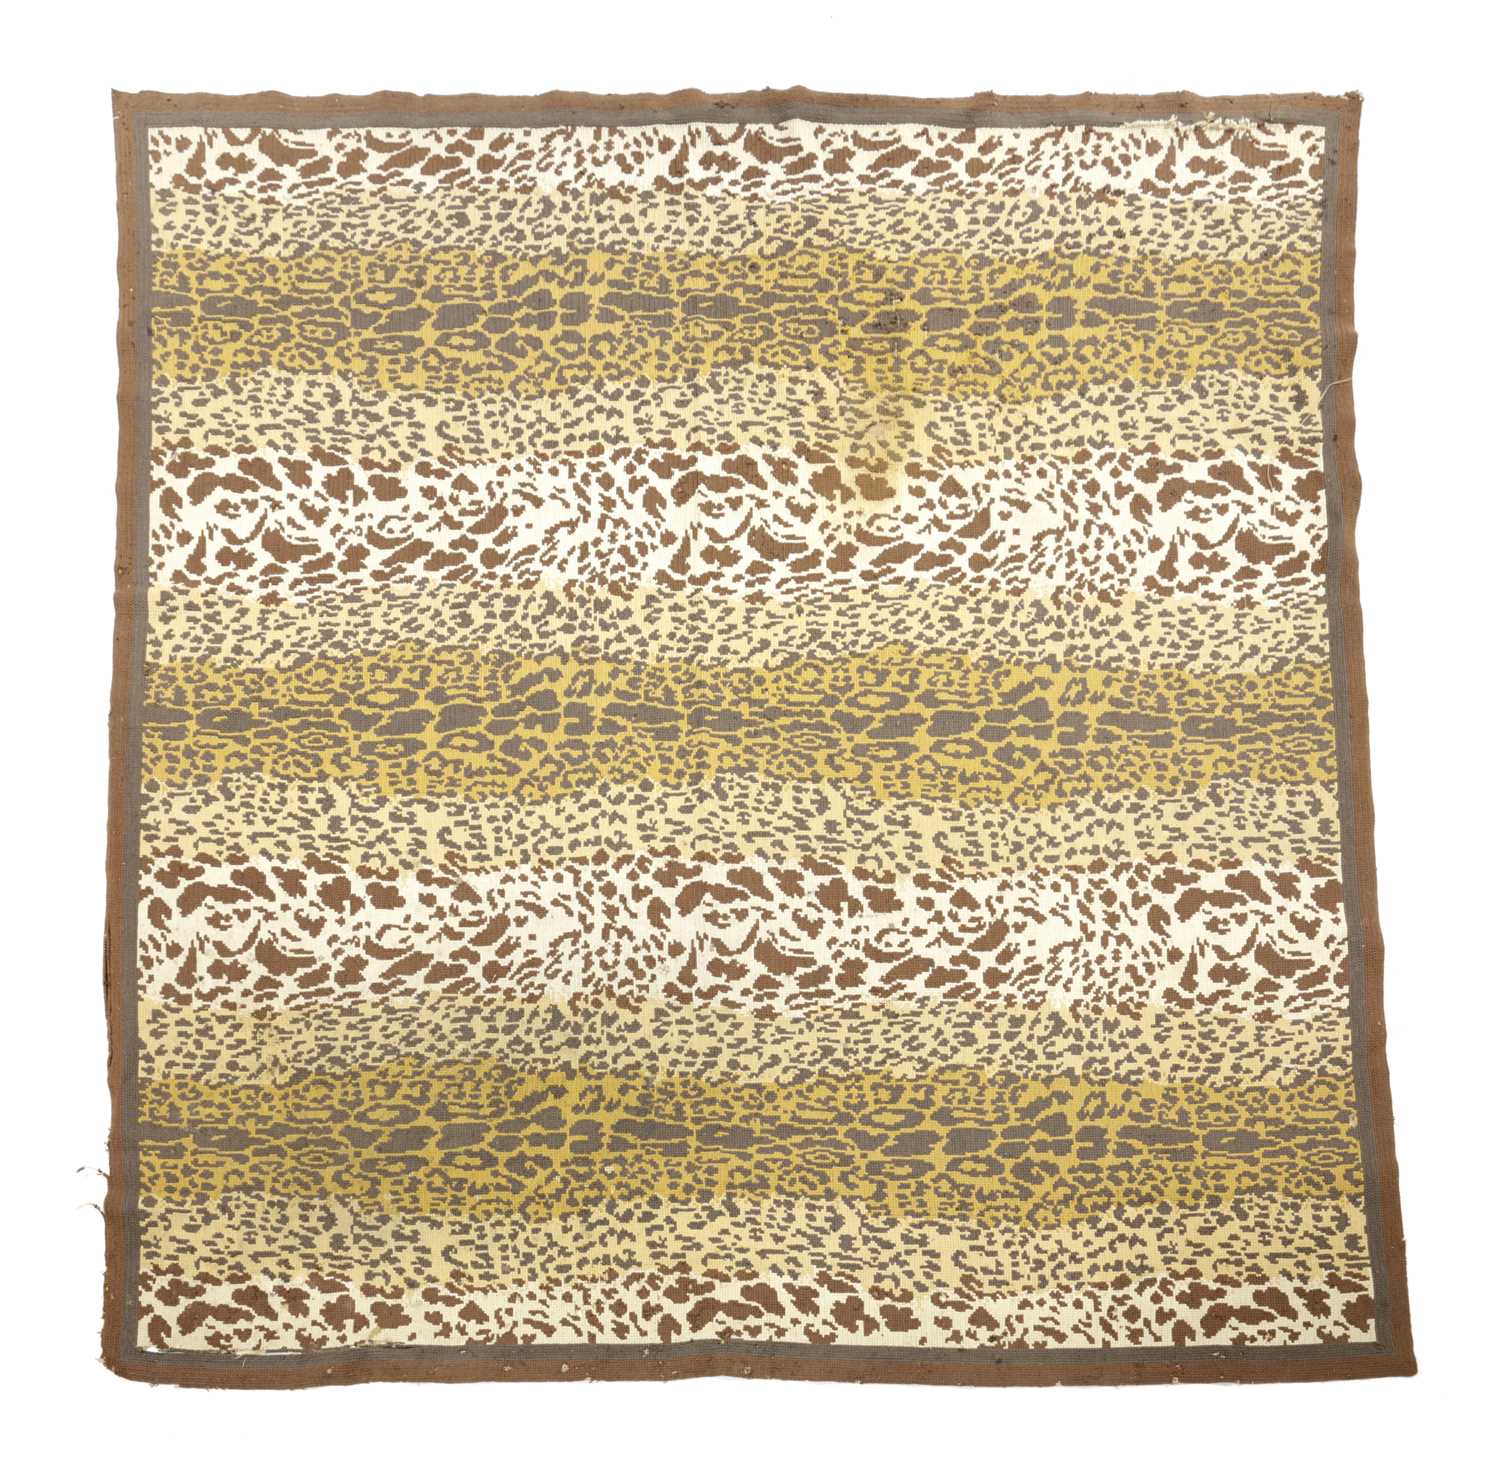 A PORTUGUESE FLAT WEAVE RUG OF LEOPARD SKIN DESIGN C.1930 enclosed by narrow borders 240 x 239cm